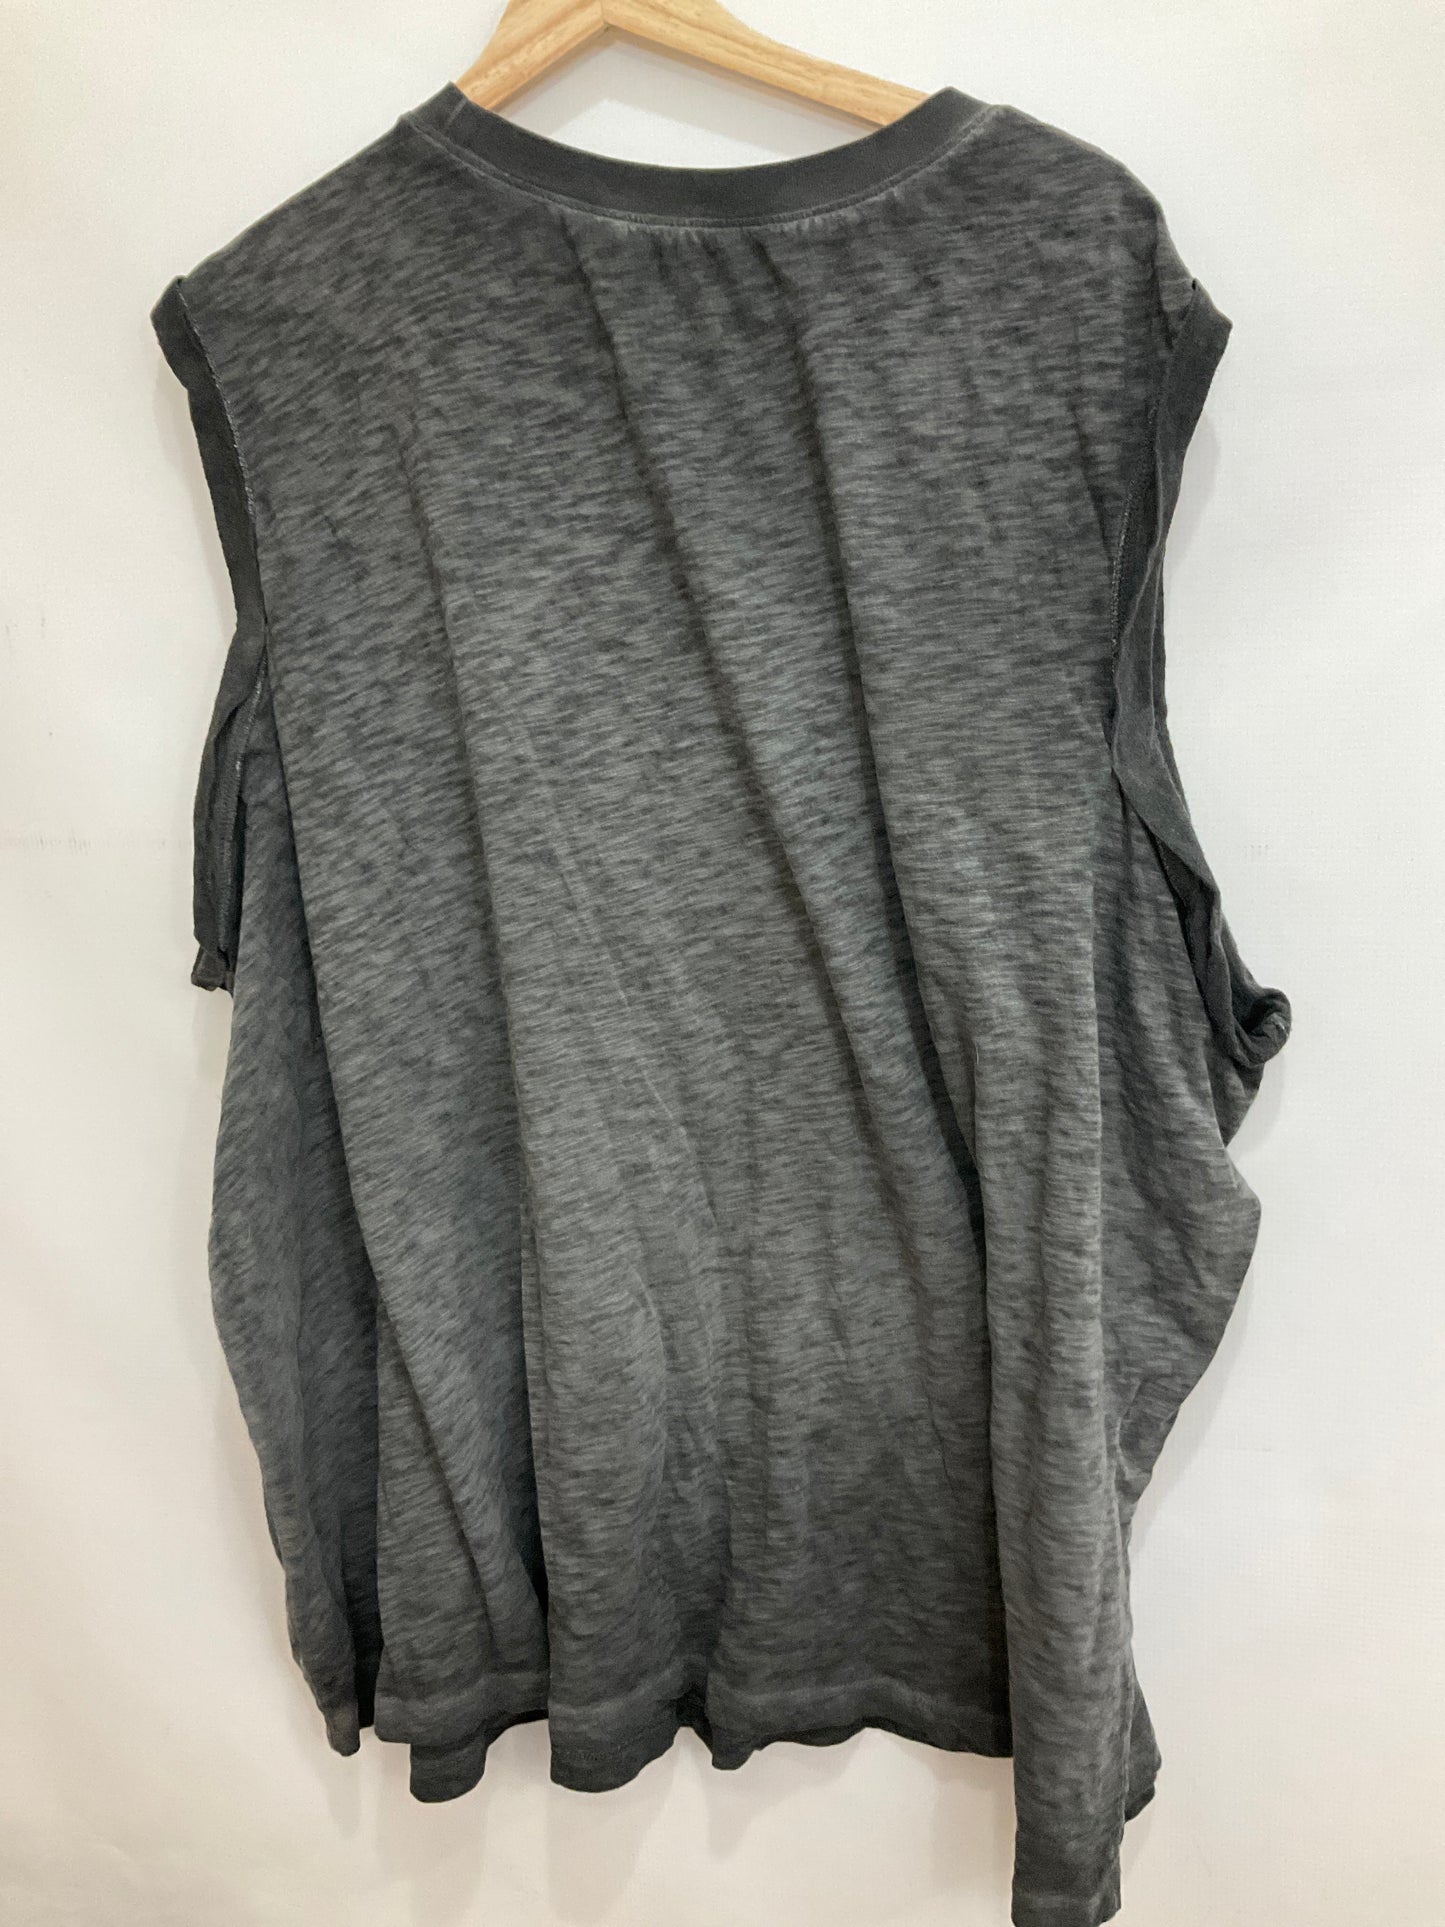 Top Sleeveless By Torrid  Size: 4x